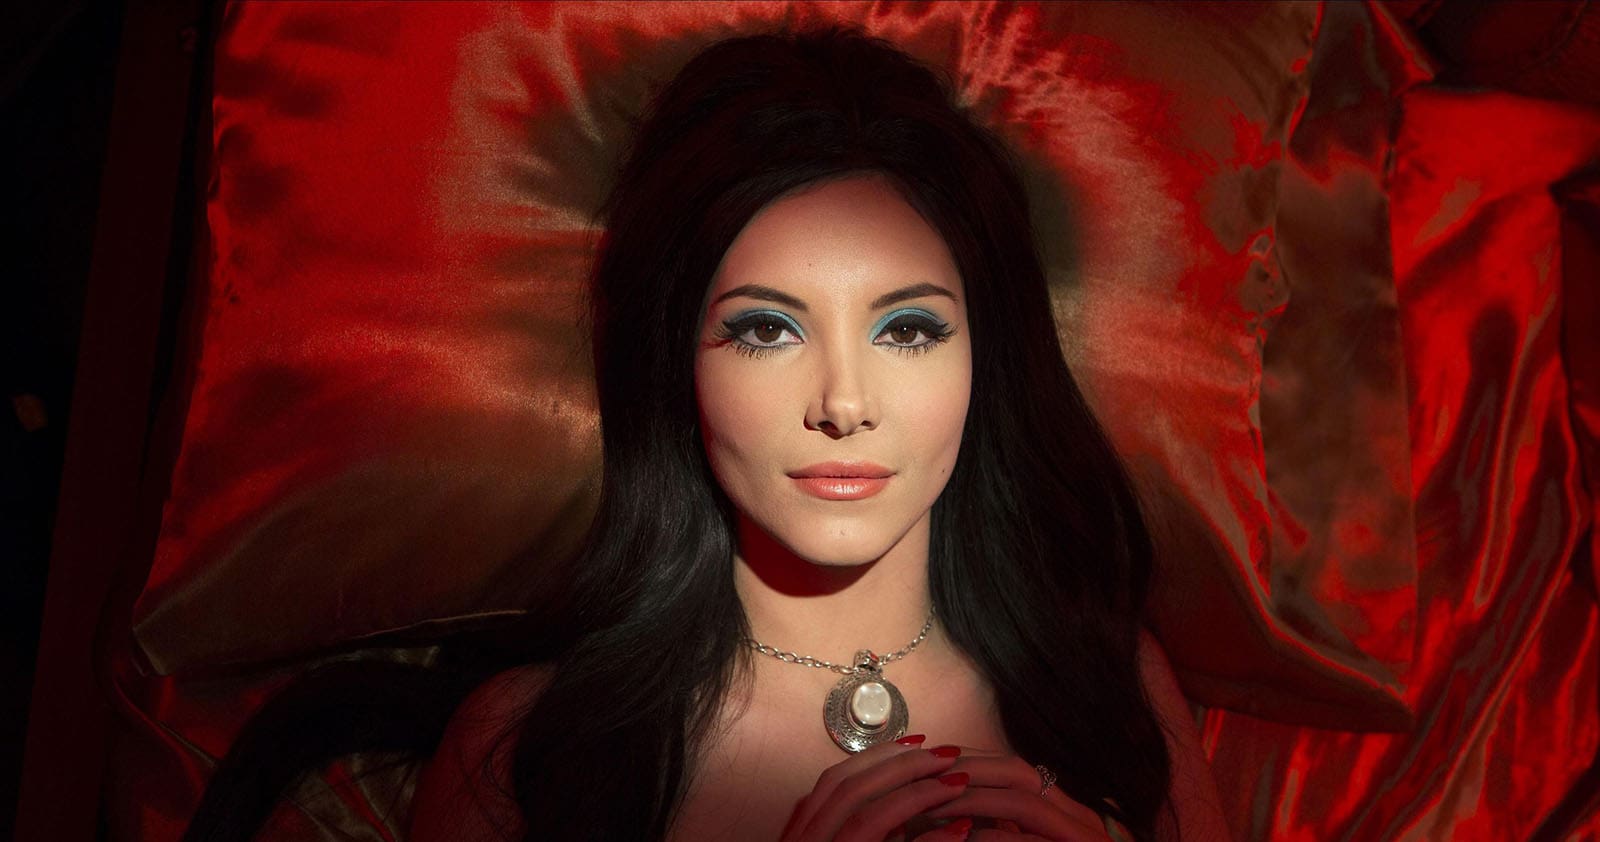 The Love Witch (2016) movie review